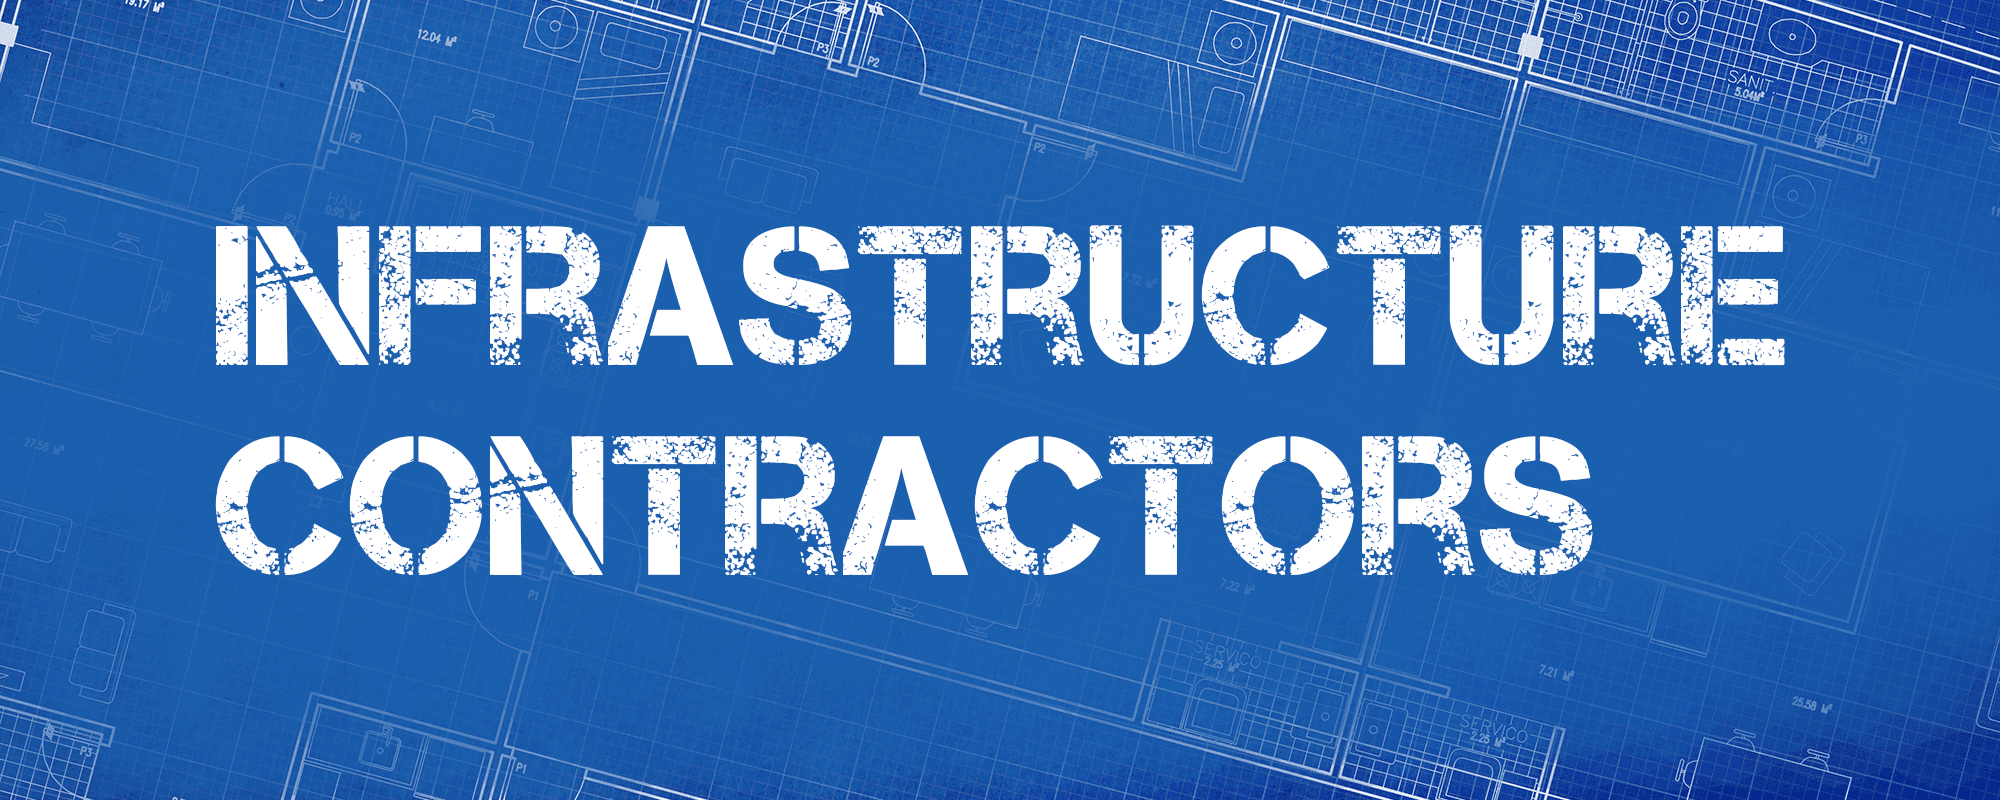 Featured image for “Infrastructure Contractors”